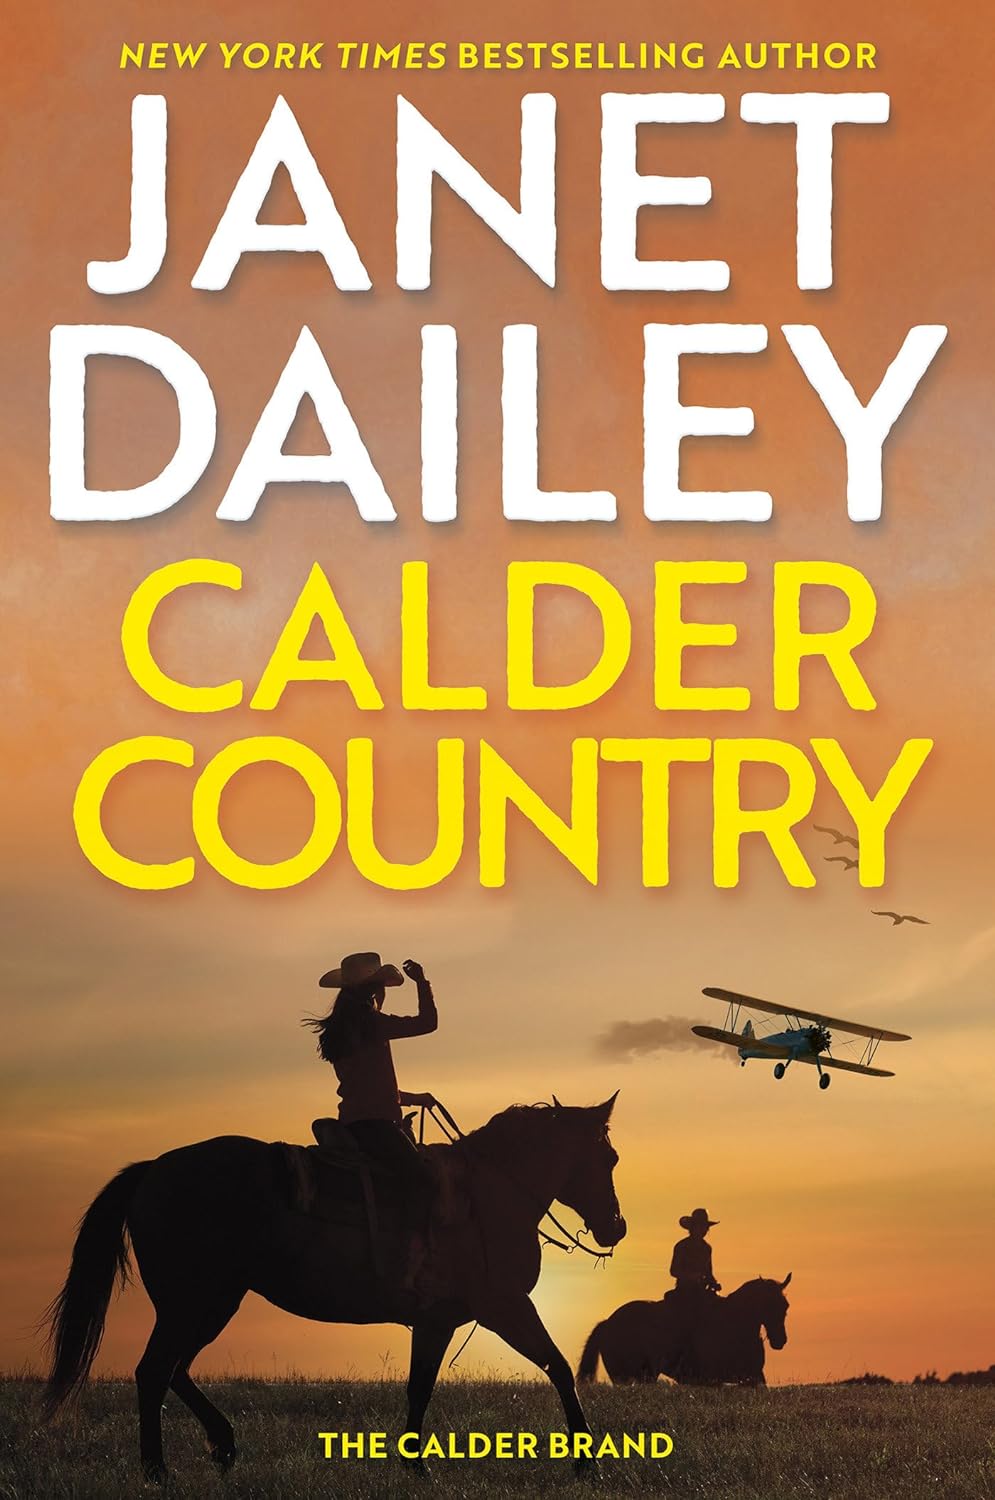 Image for "Calder Country"